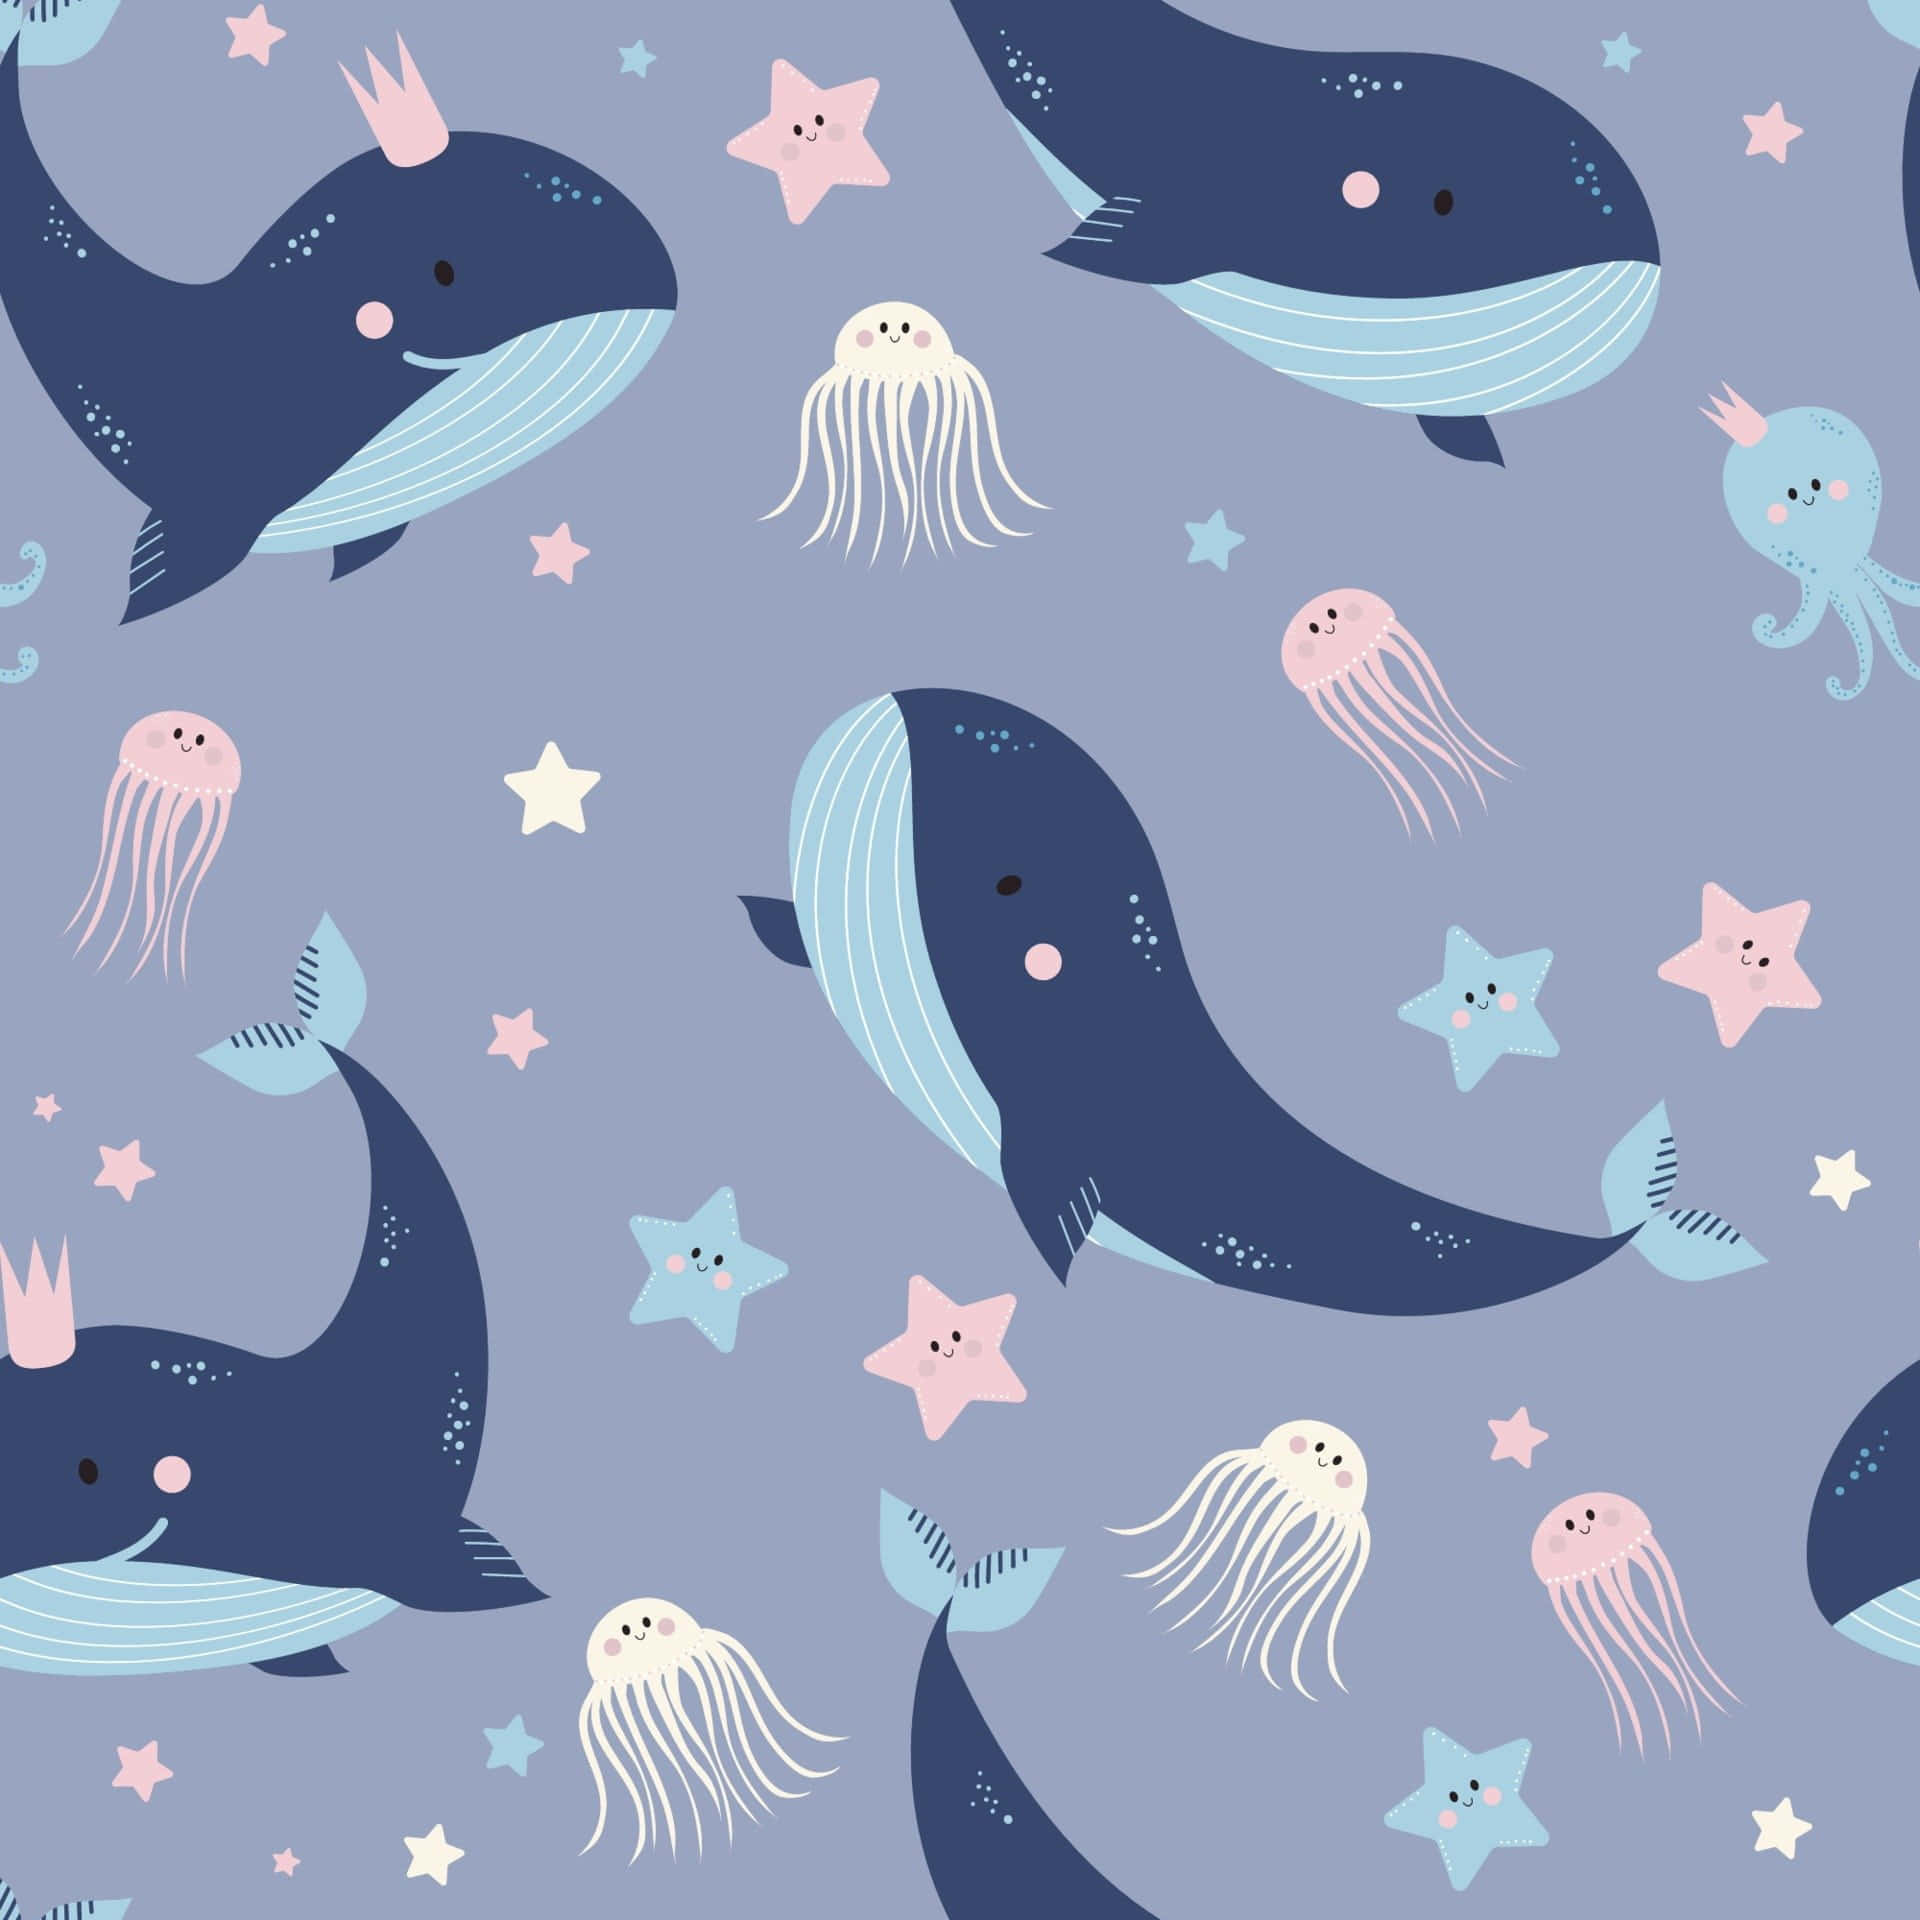 A collection of colorful Kawaii sea creatures happily swimming underwater Wallpaper